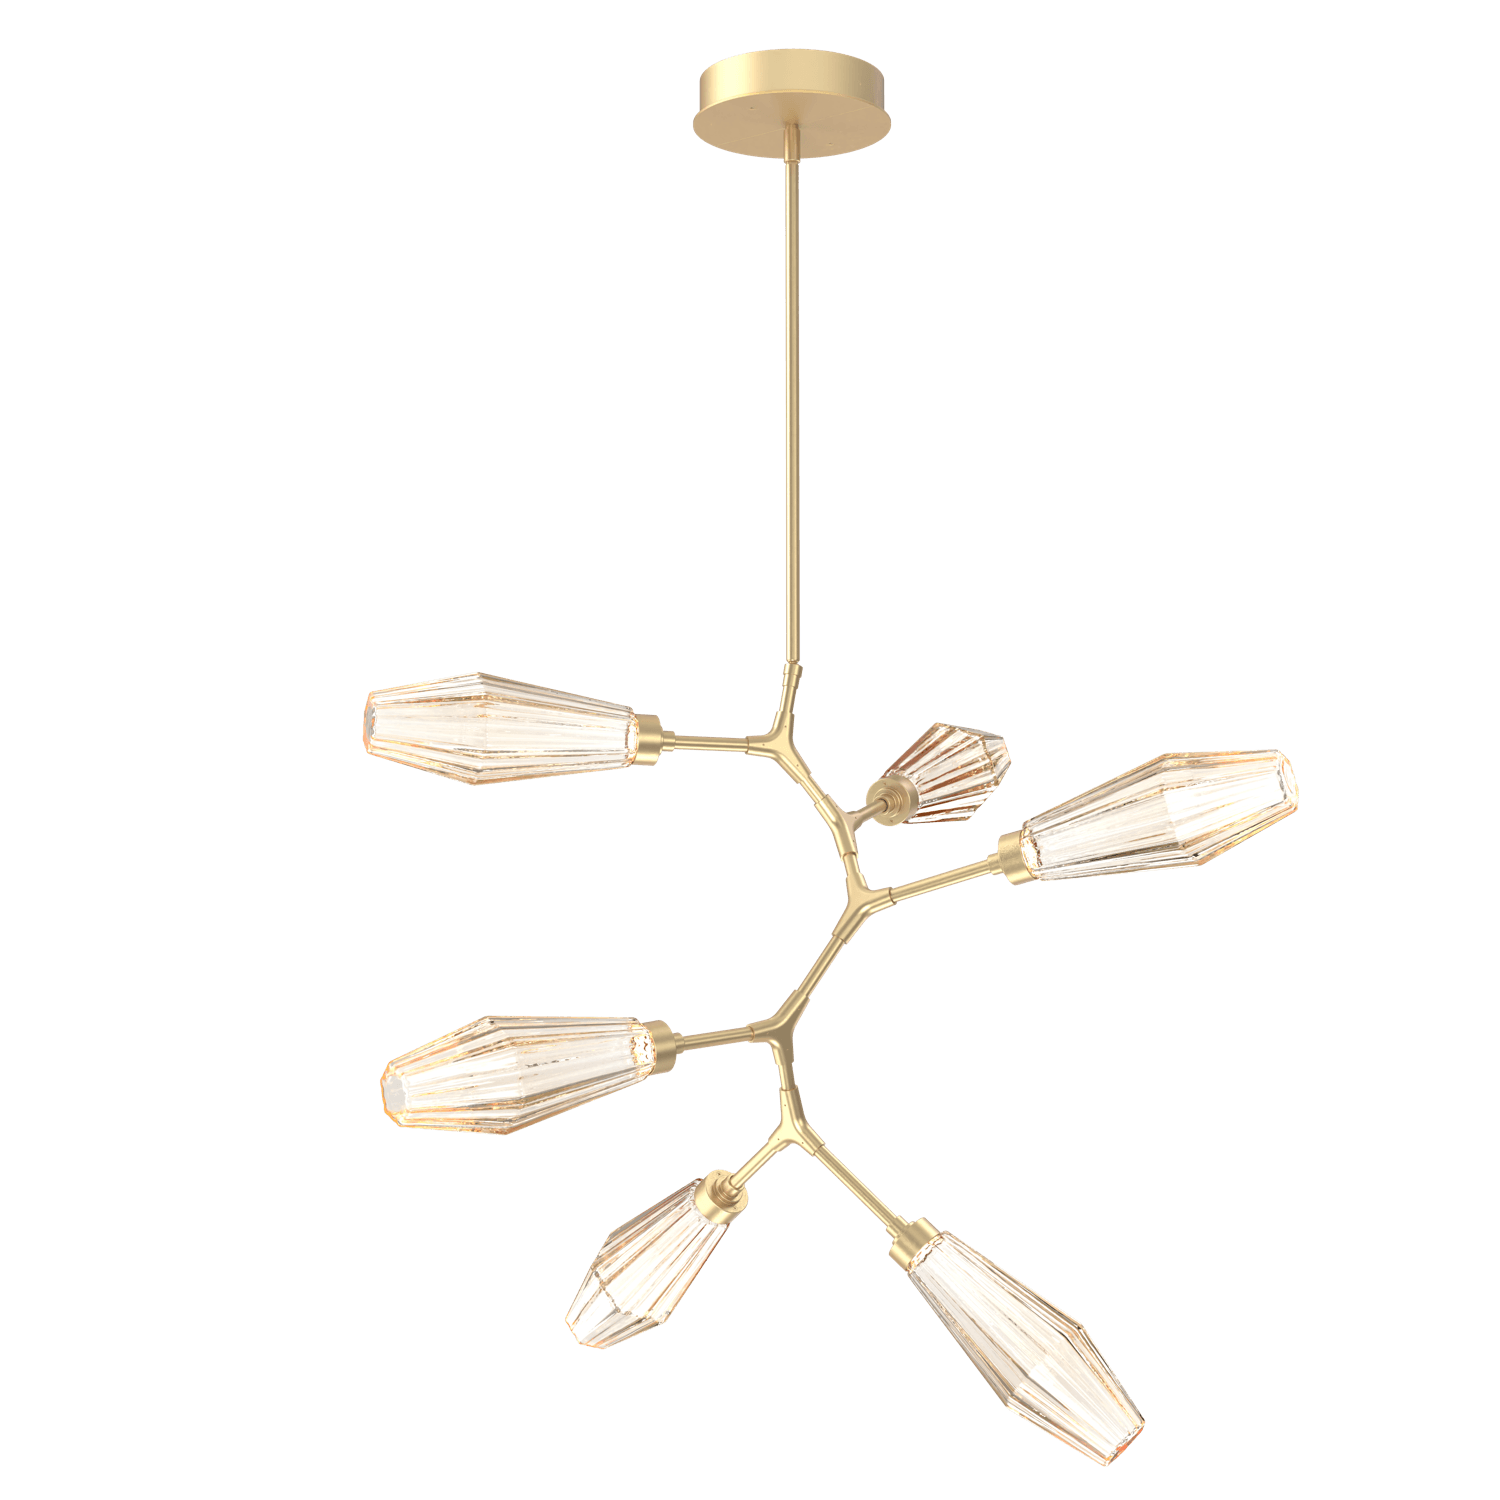 CHB0049-VA-GB-RA-Hammerton-Studio-Aalto-6-light-modern-vine-chandelier-with-gilded-brass-finish-and-optic-ribbed-amber-glass-shades-and-LED-lamping